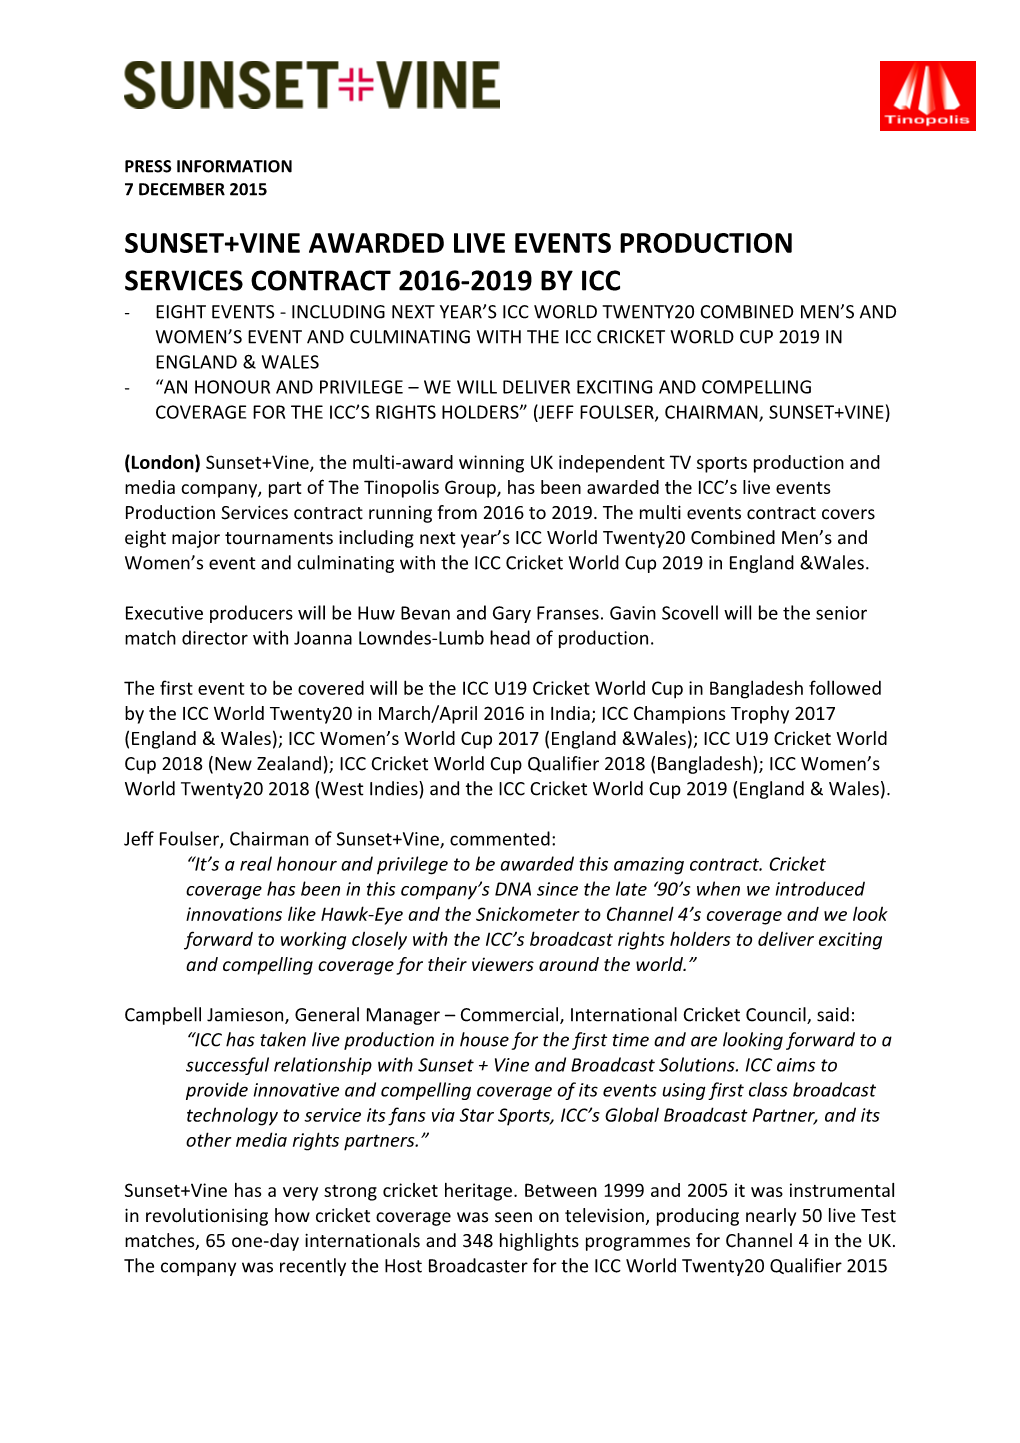 Sunset+Vine Awarded Live Events Production Services Contract 2016-2019 by Icc